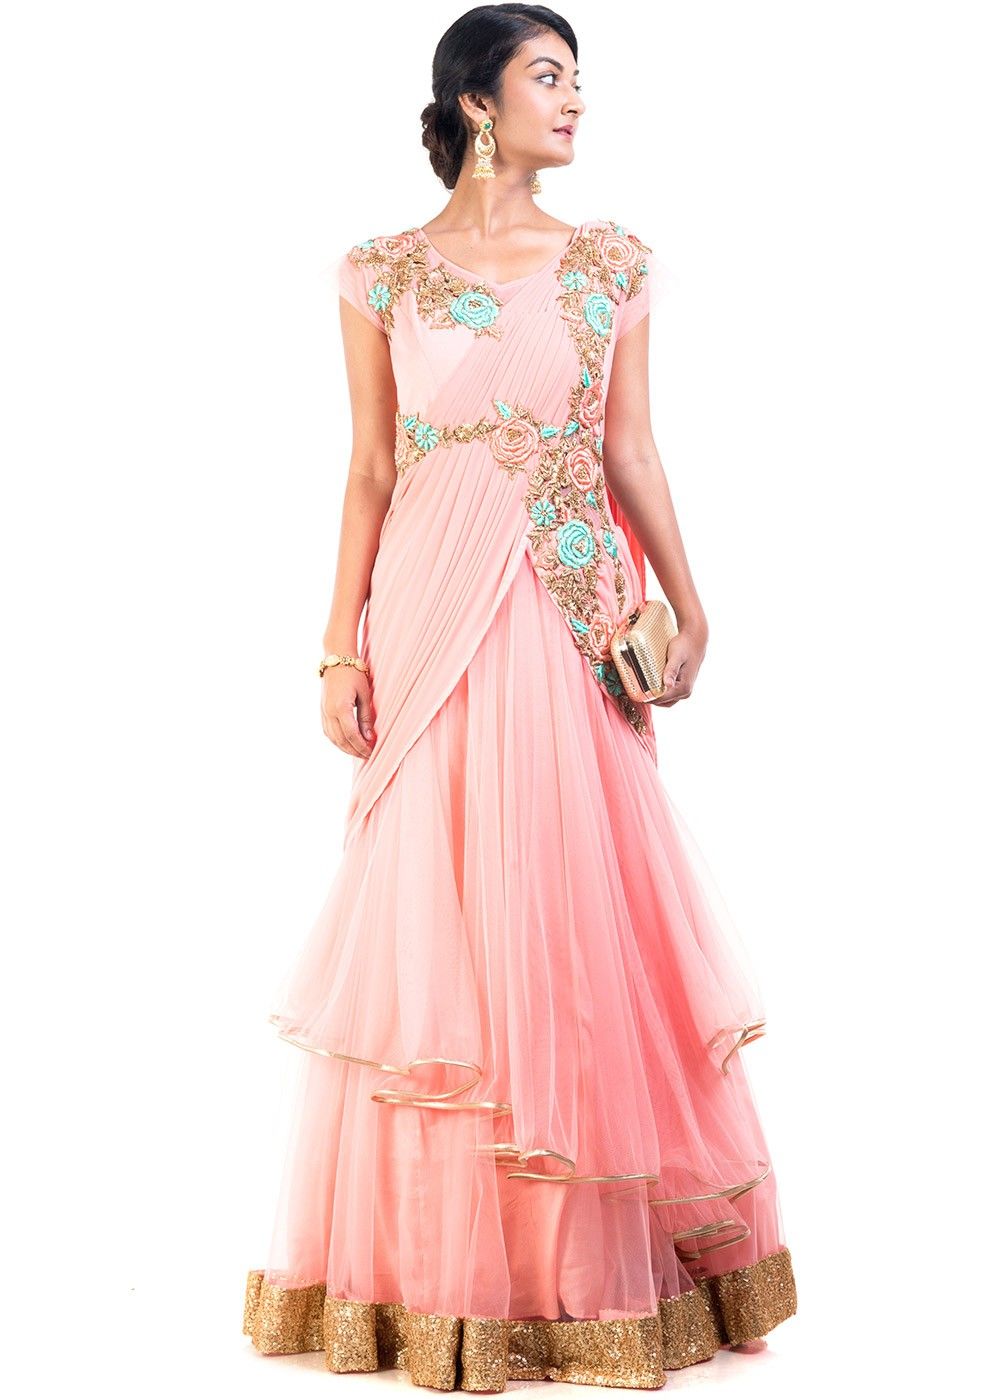 Indian Dresses & Indian Outfits Online for Women with Free Shipping